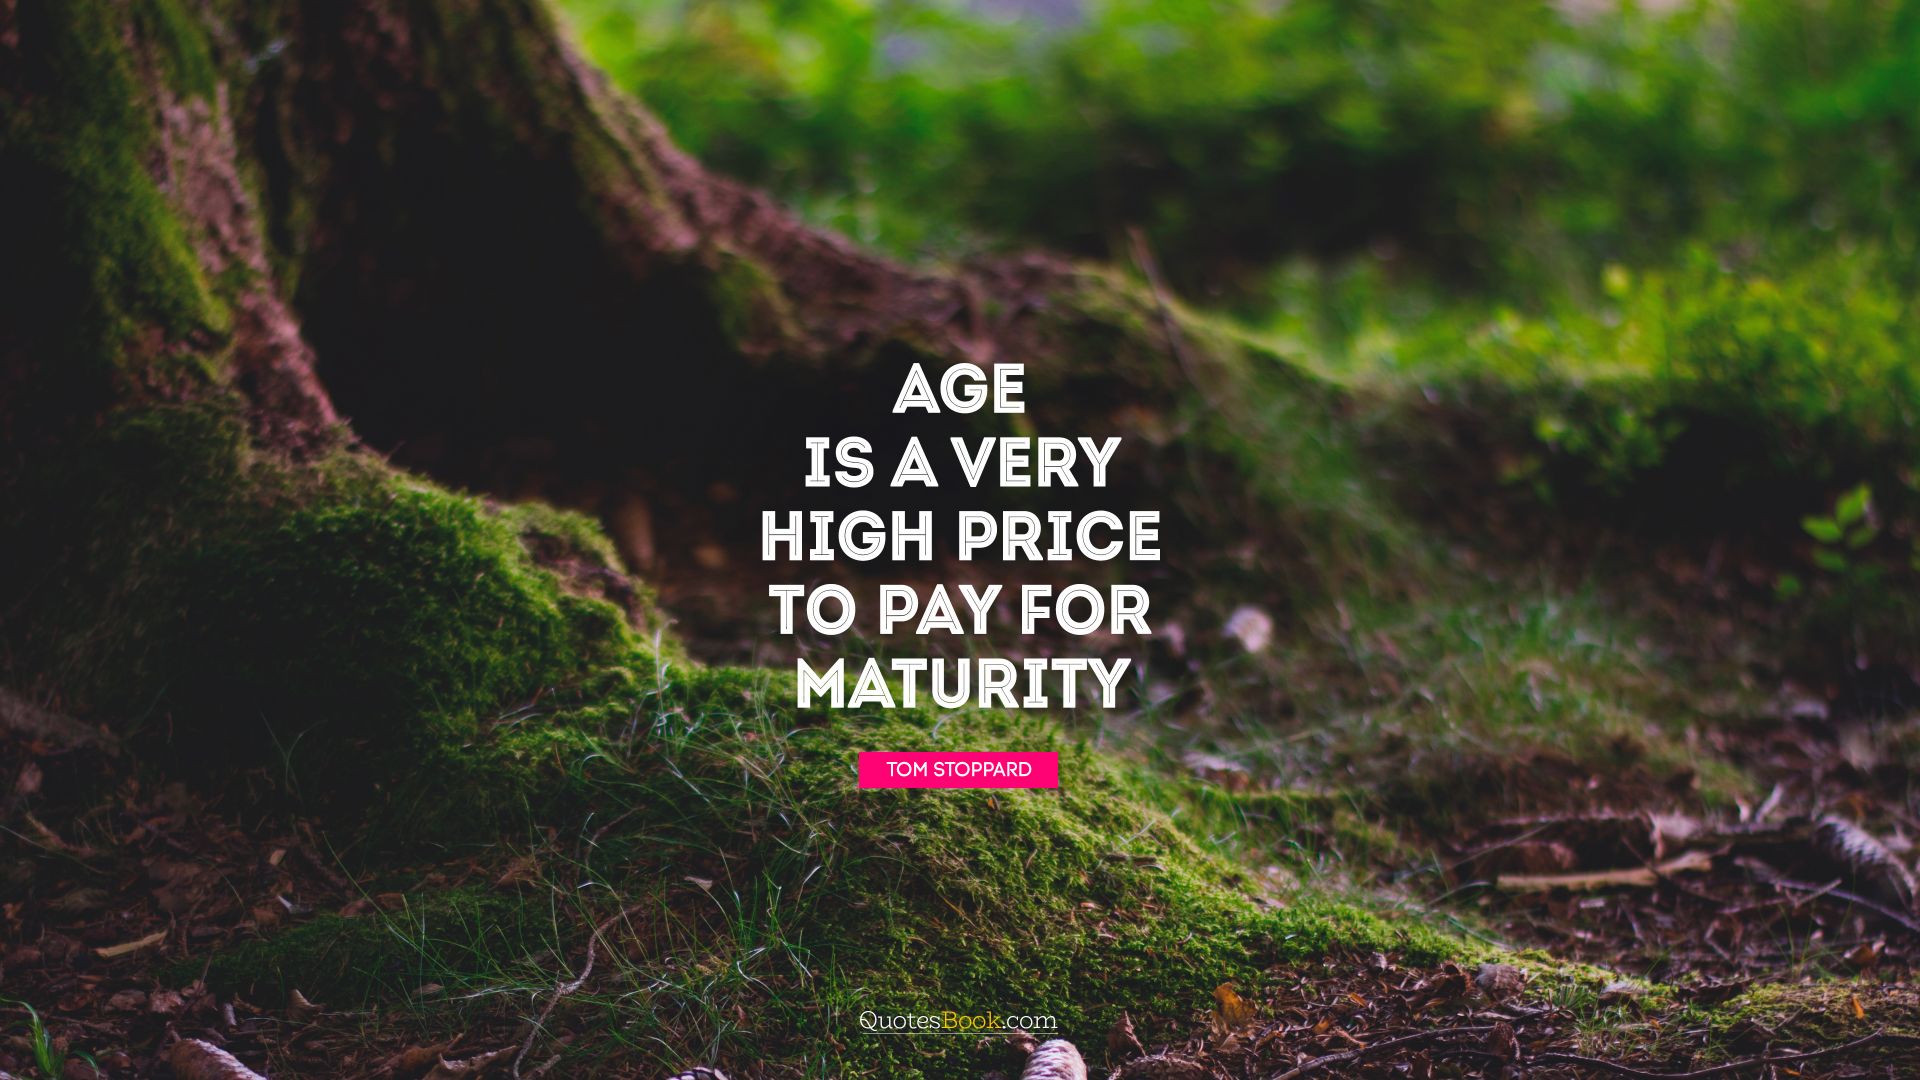 Age is a very high price to pay for maturity. - Quote by Tom Stoppard